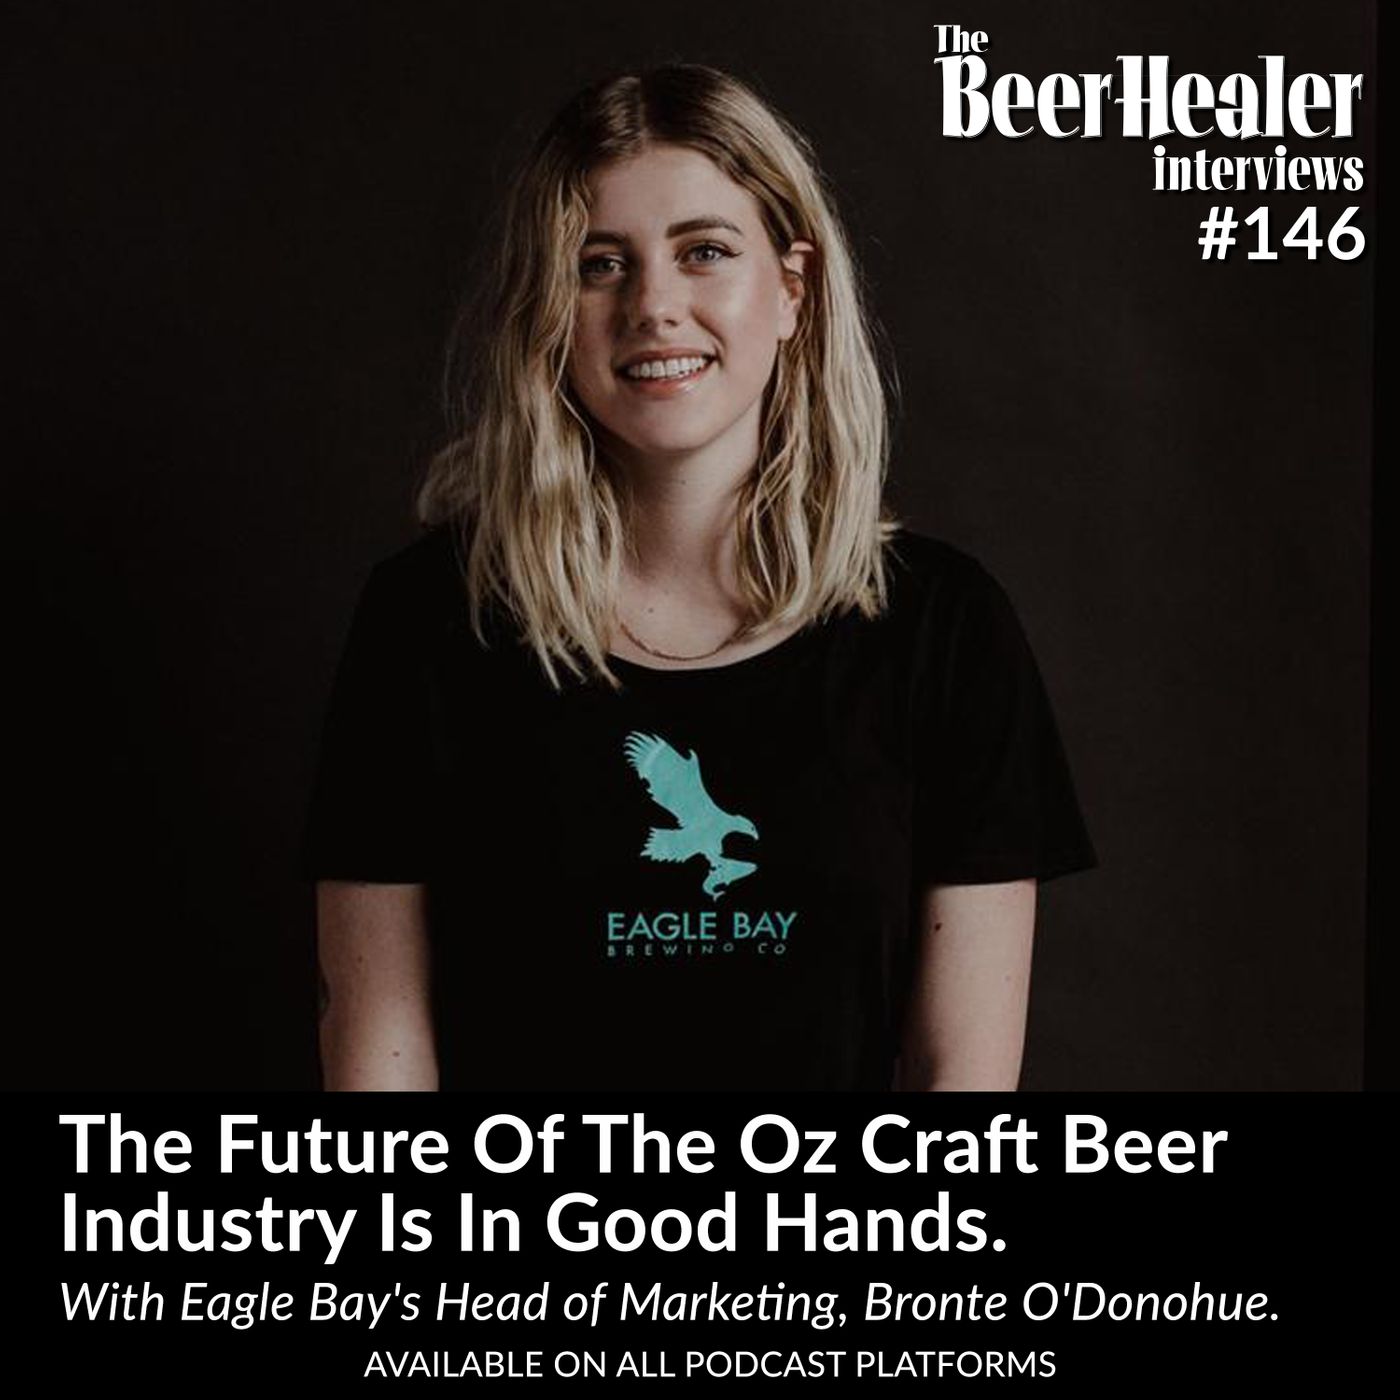 Ep. 146 - The Future Of The Oz Craft Beer Industry Is In Good Hands. With Eagle Bay Brewing Co's Head of Marketing, Bronte O'Donoghue.